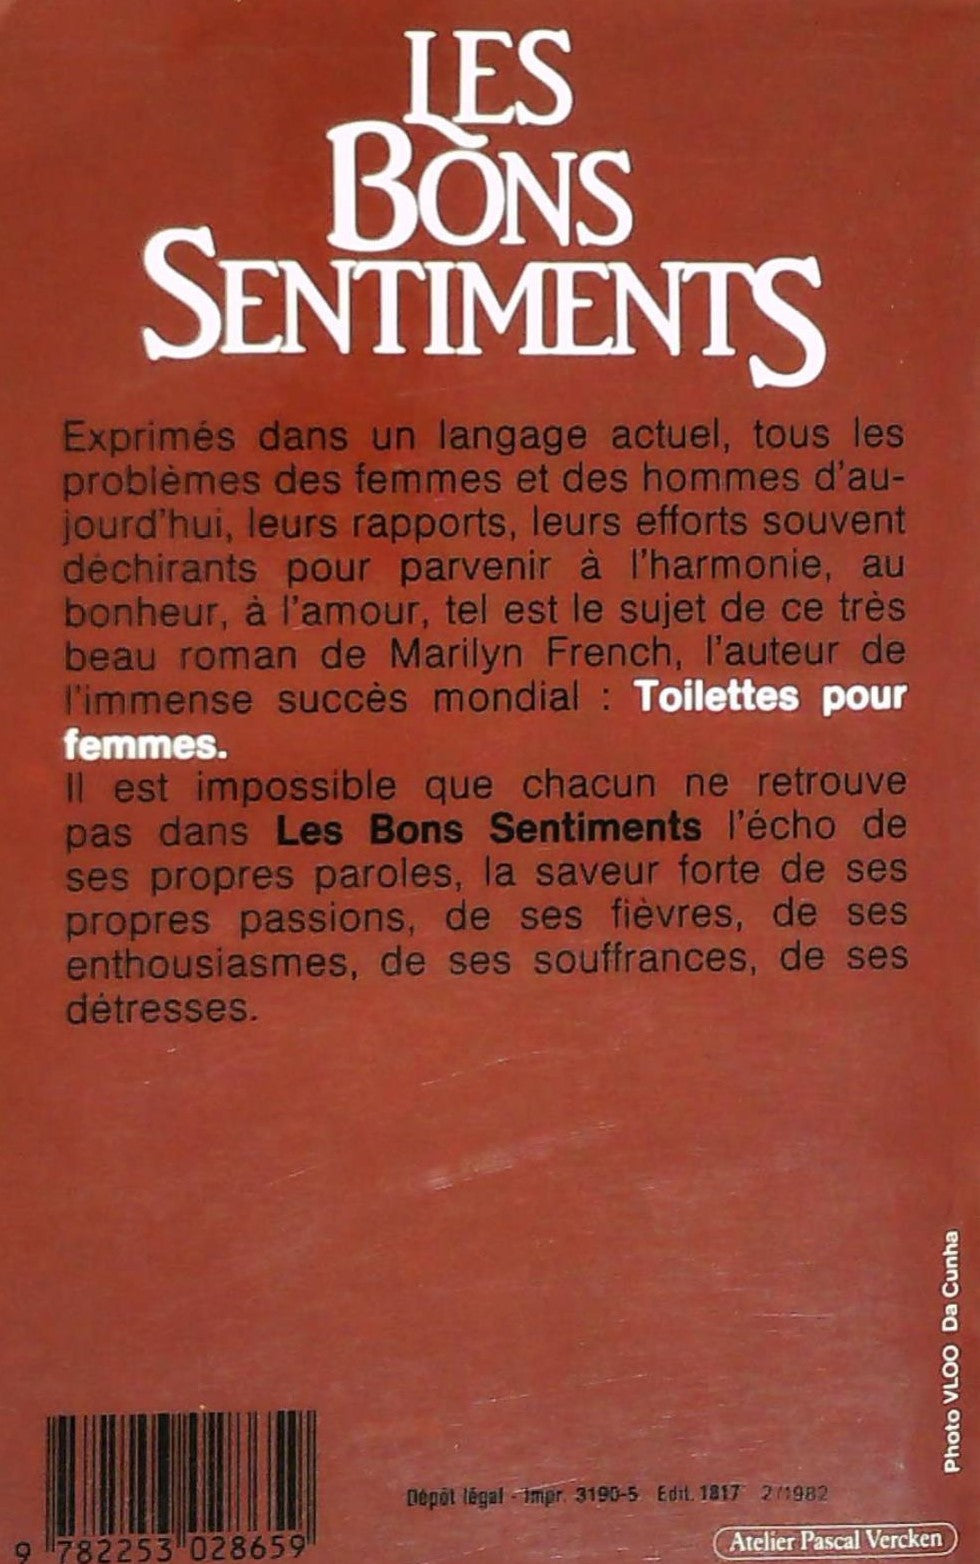 Les bons sentiments (Marilyn French)